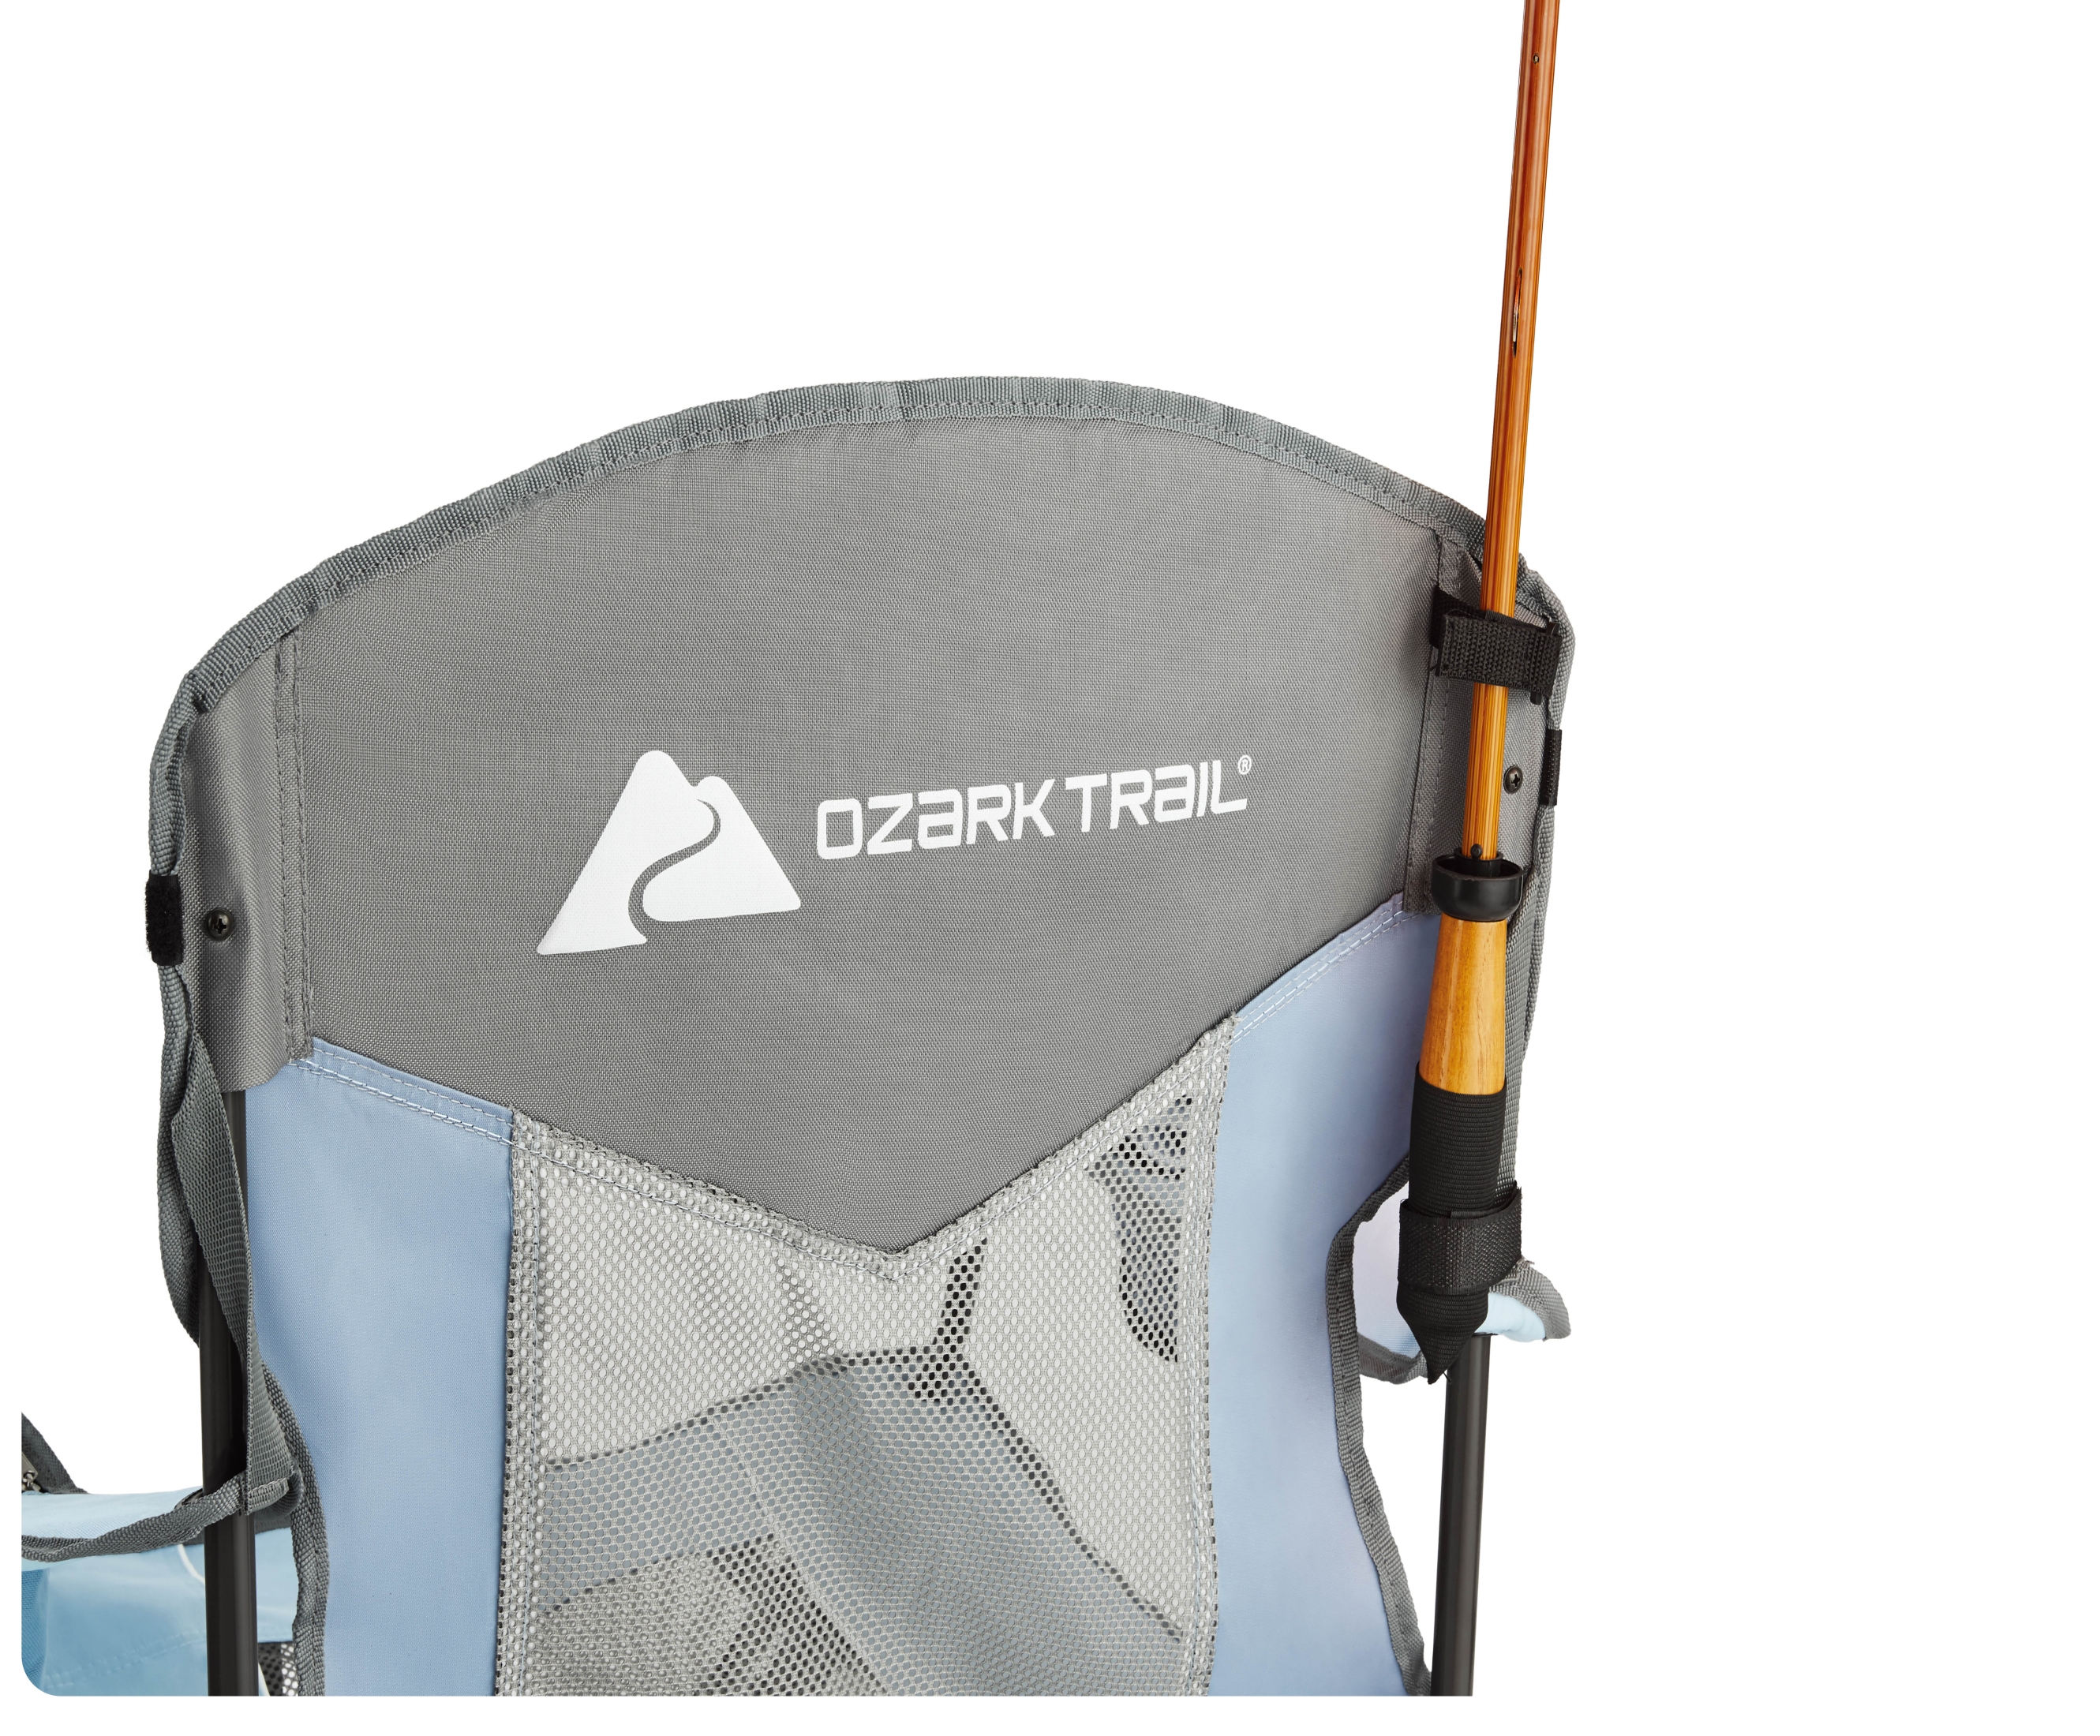 Ozark Trail Oversized Mesh Camp Chair with Cooler, Blue/Aqua and Grey, Adult - image 5 of 9